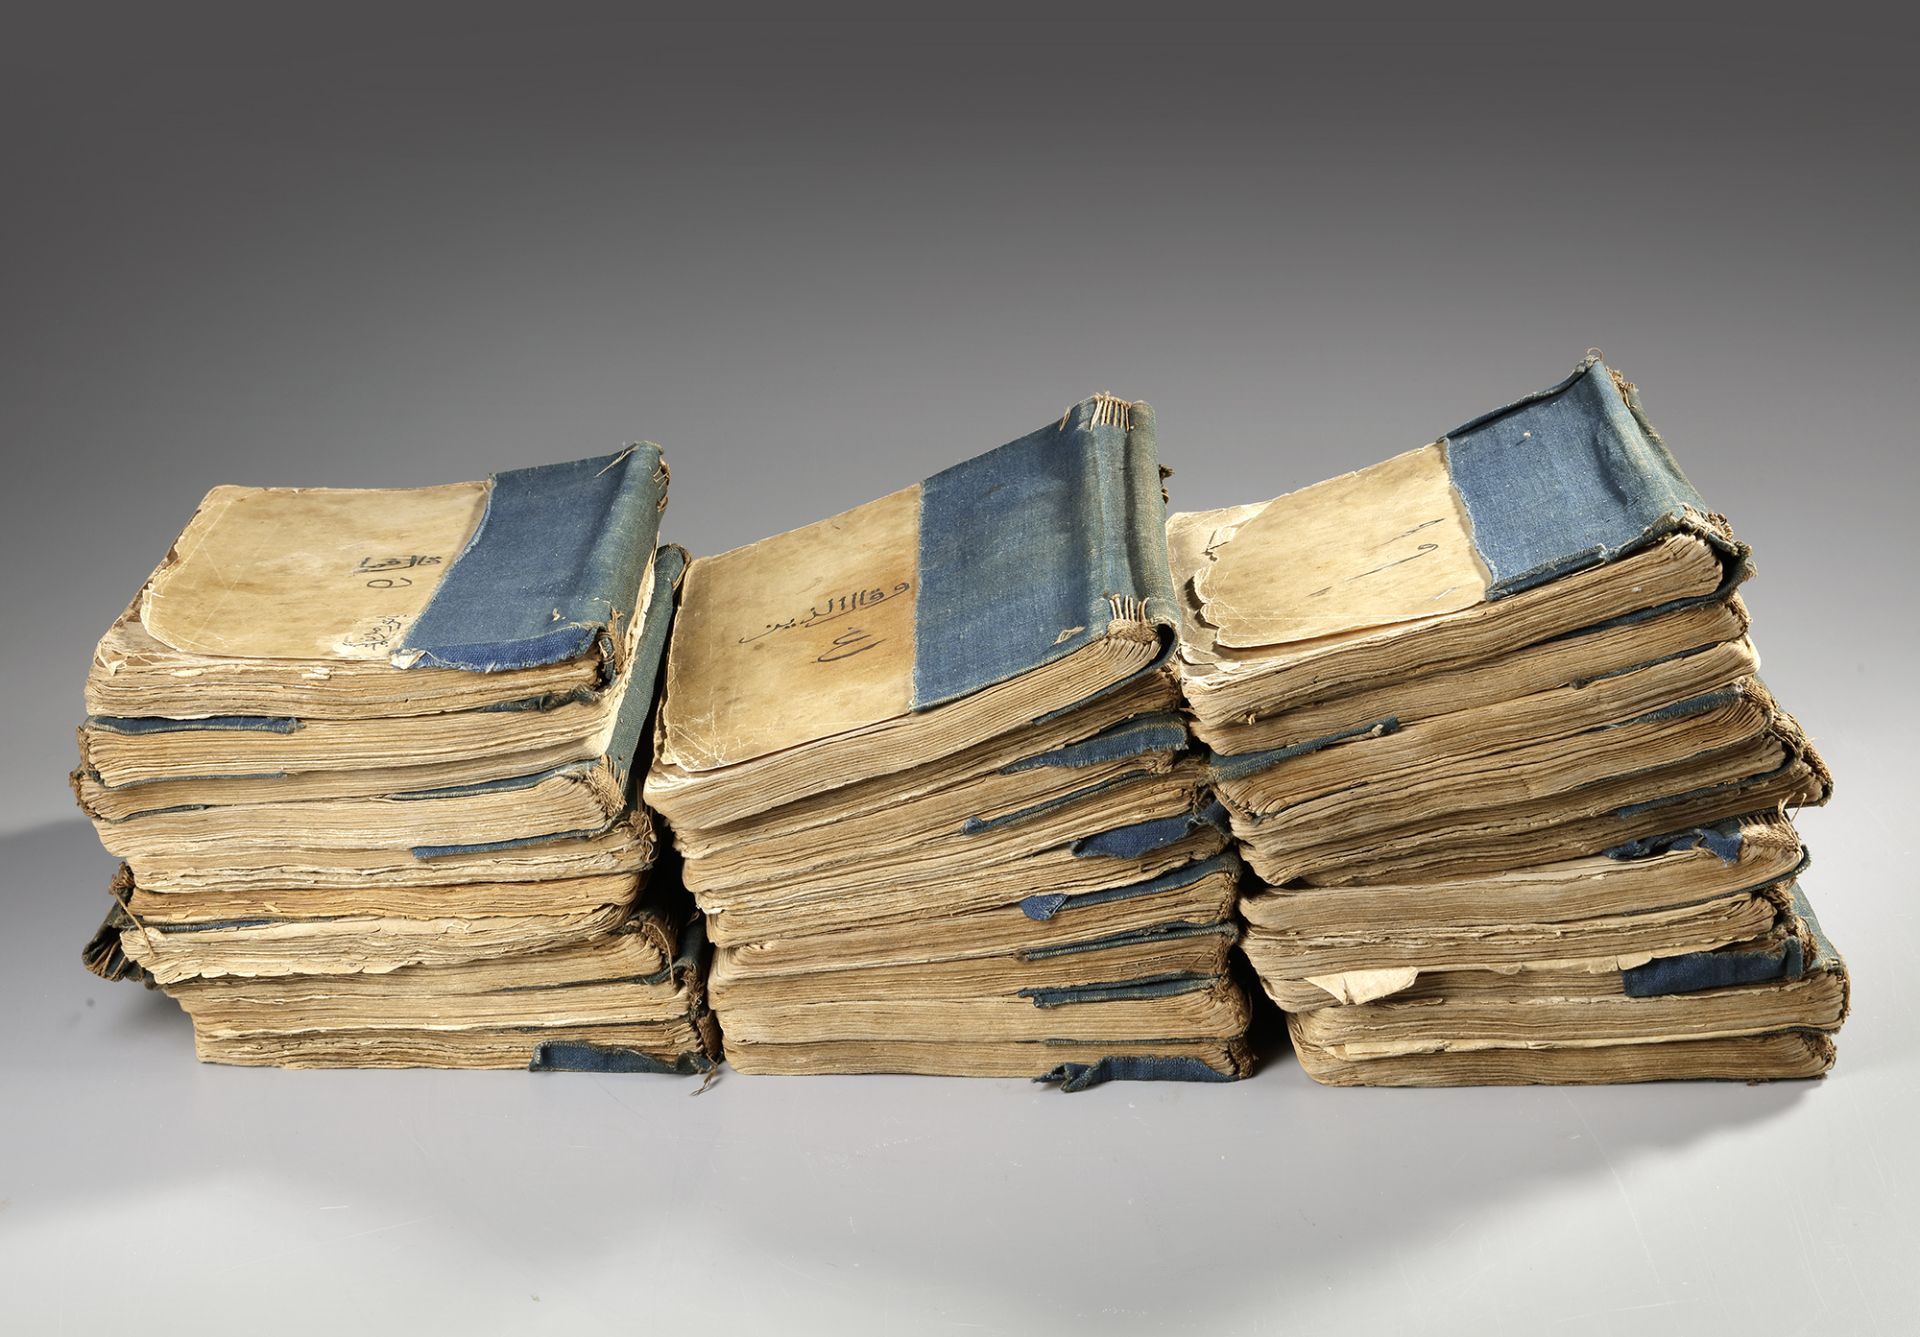 A COMPLETE QURAN IN 30 VOLUMES, CHINA, YUNNAN, 17TH CENTURY - Image 2 of 5